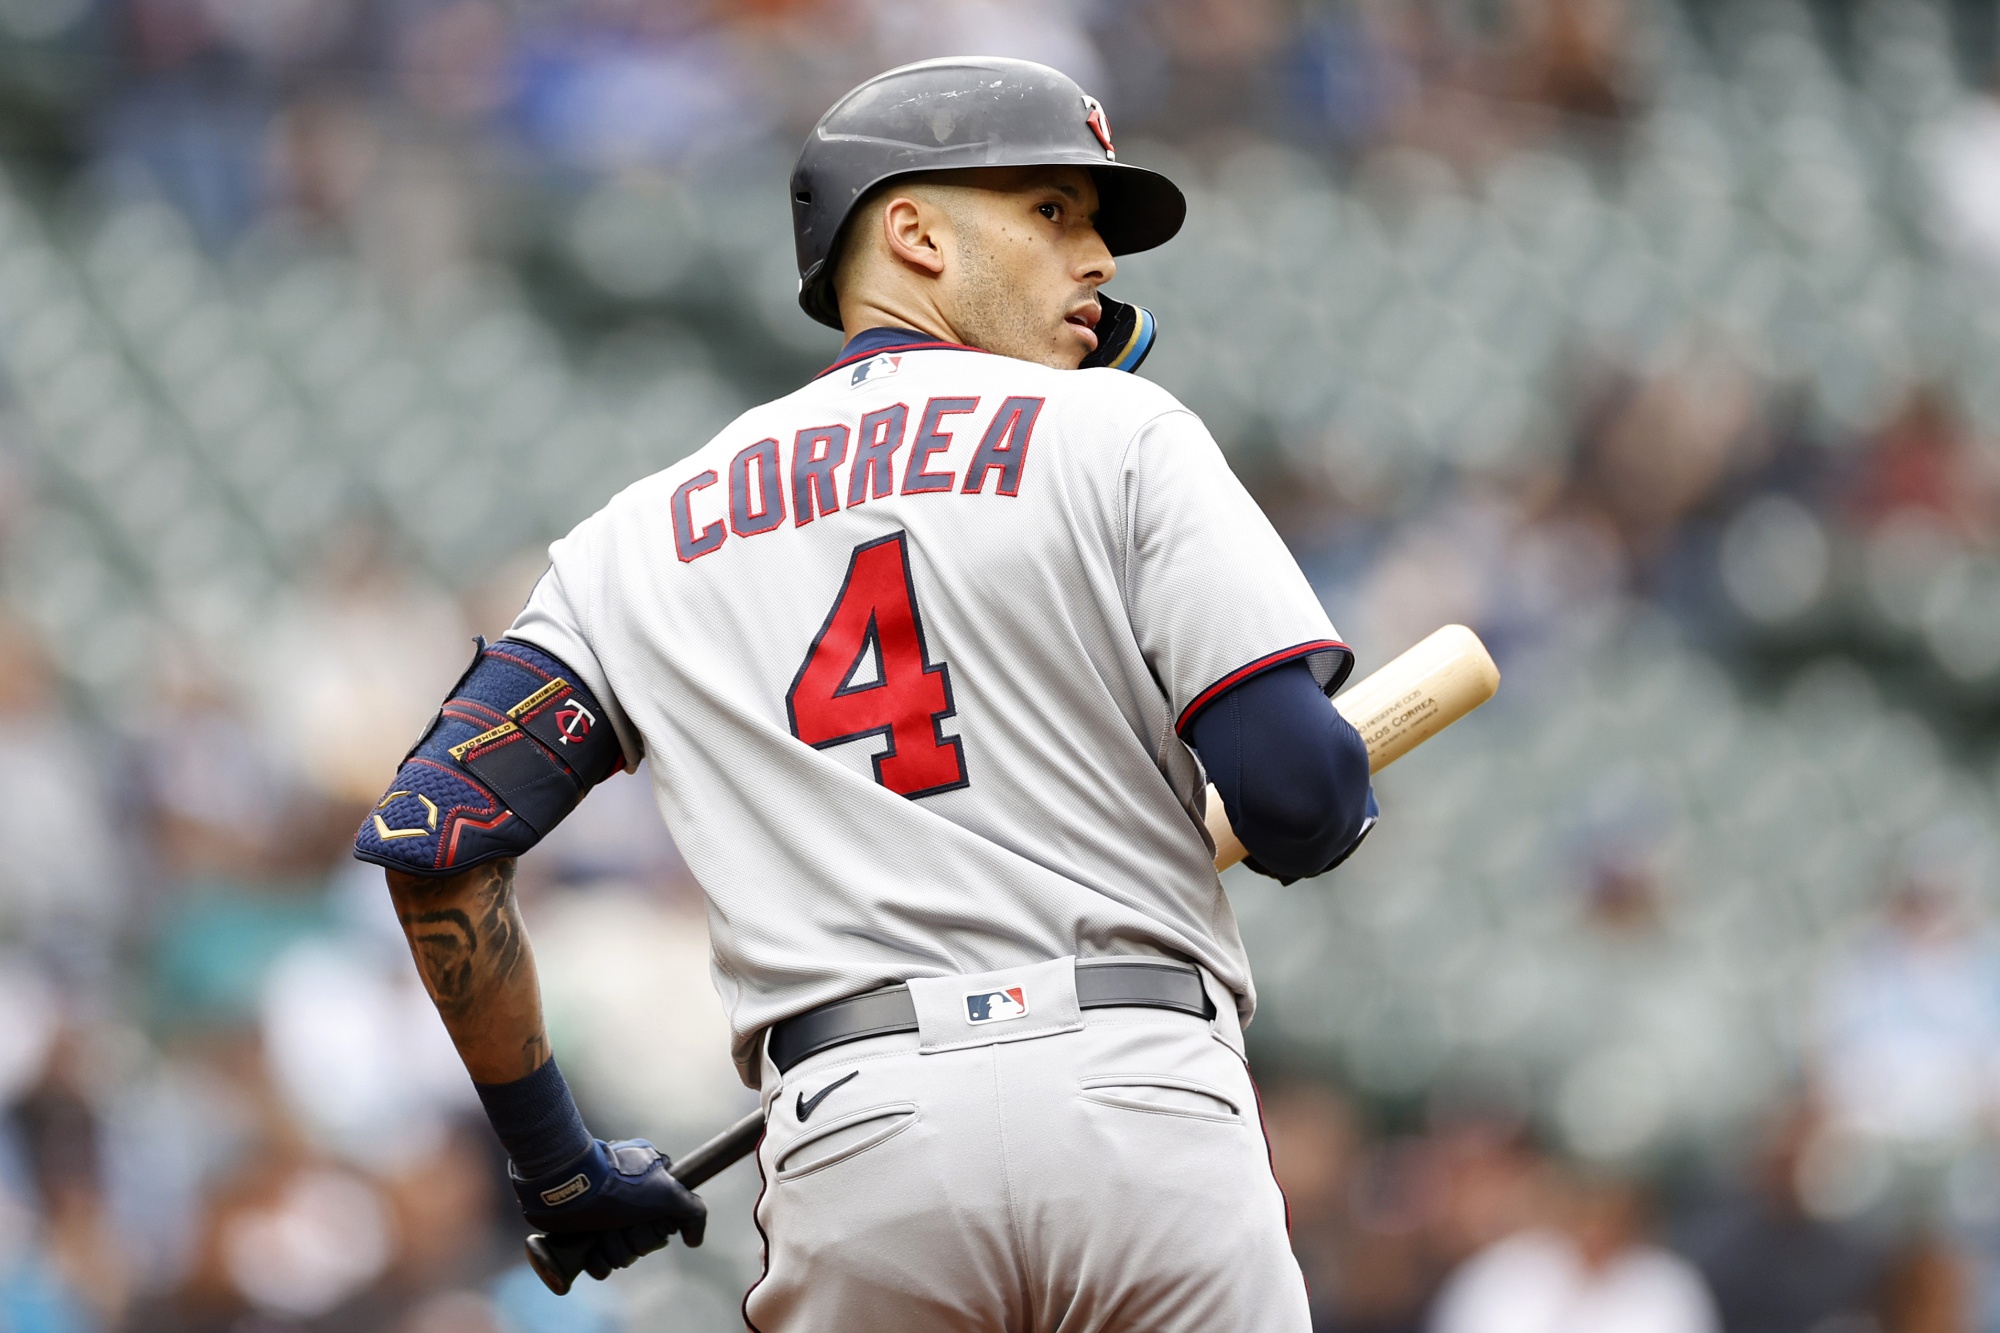 Carlos Correa agrees to 13-year, $350 million Giants contract